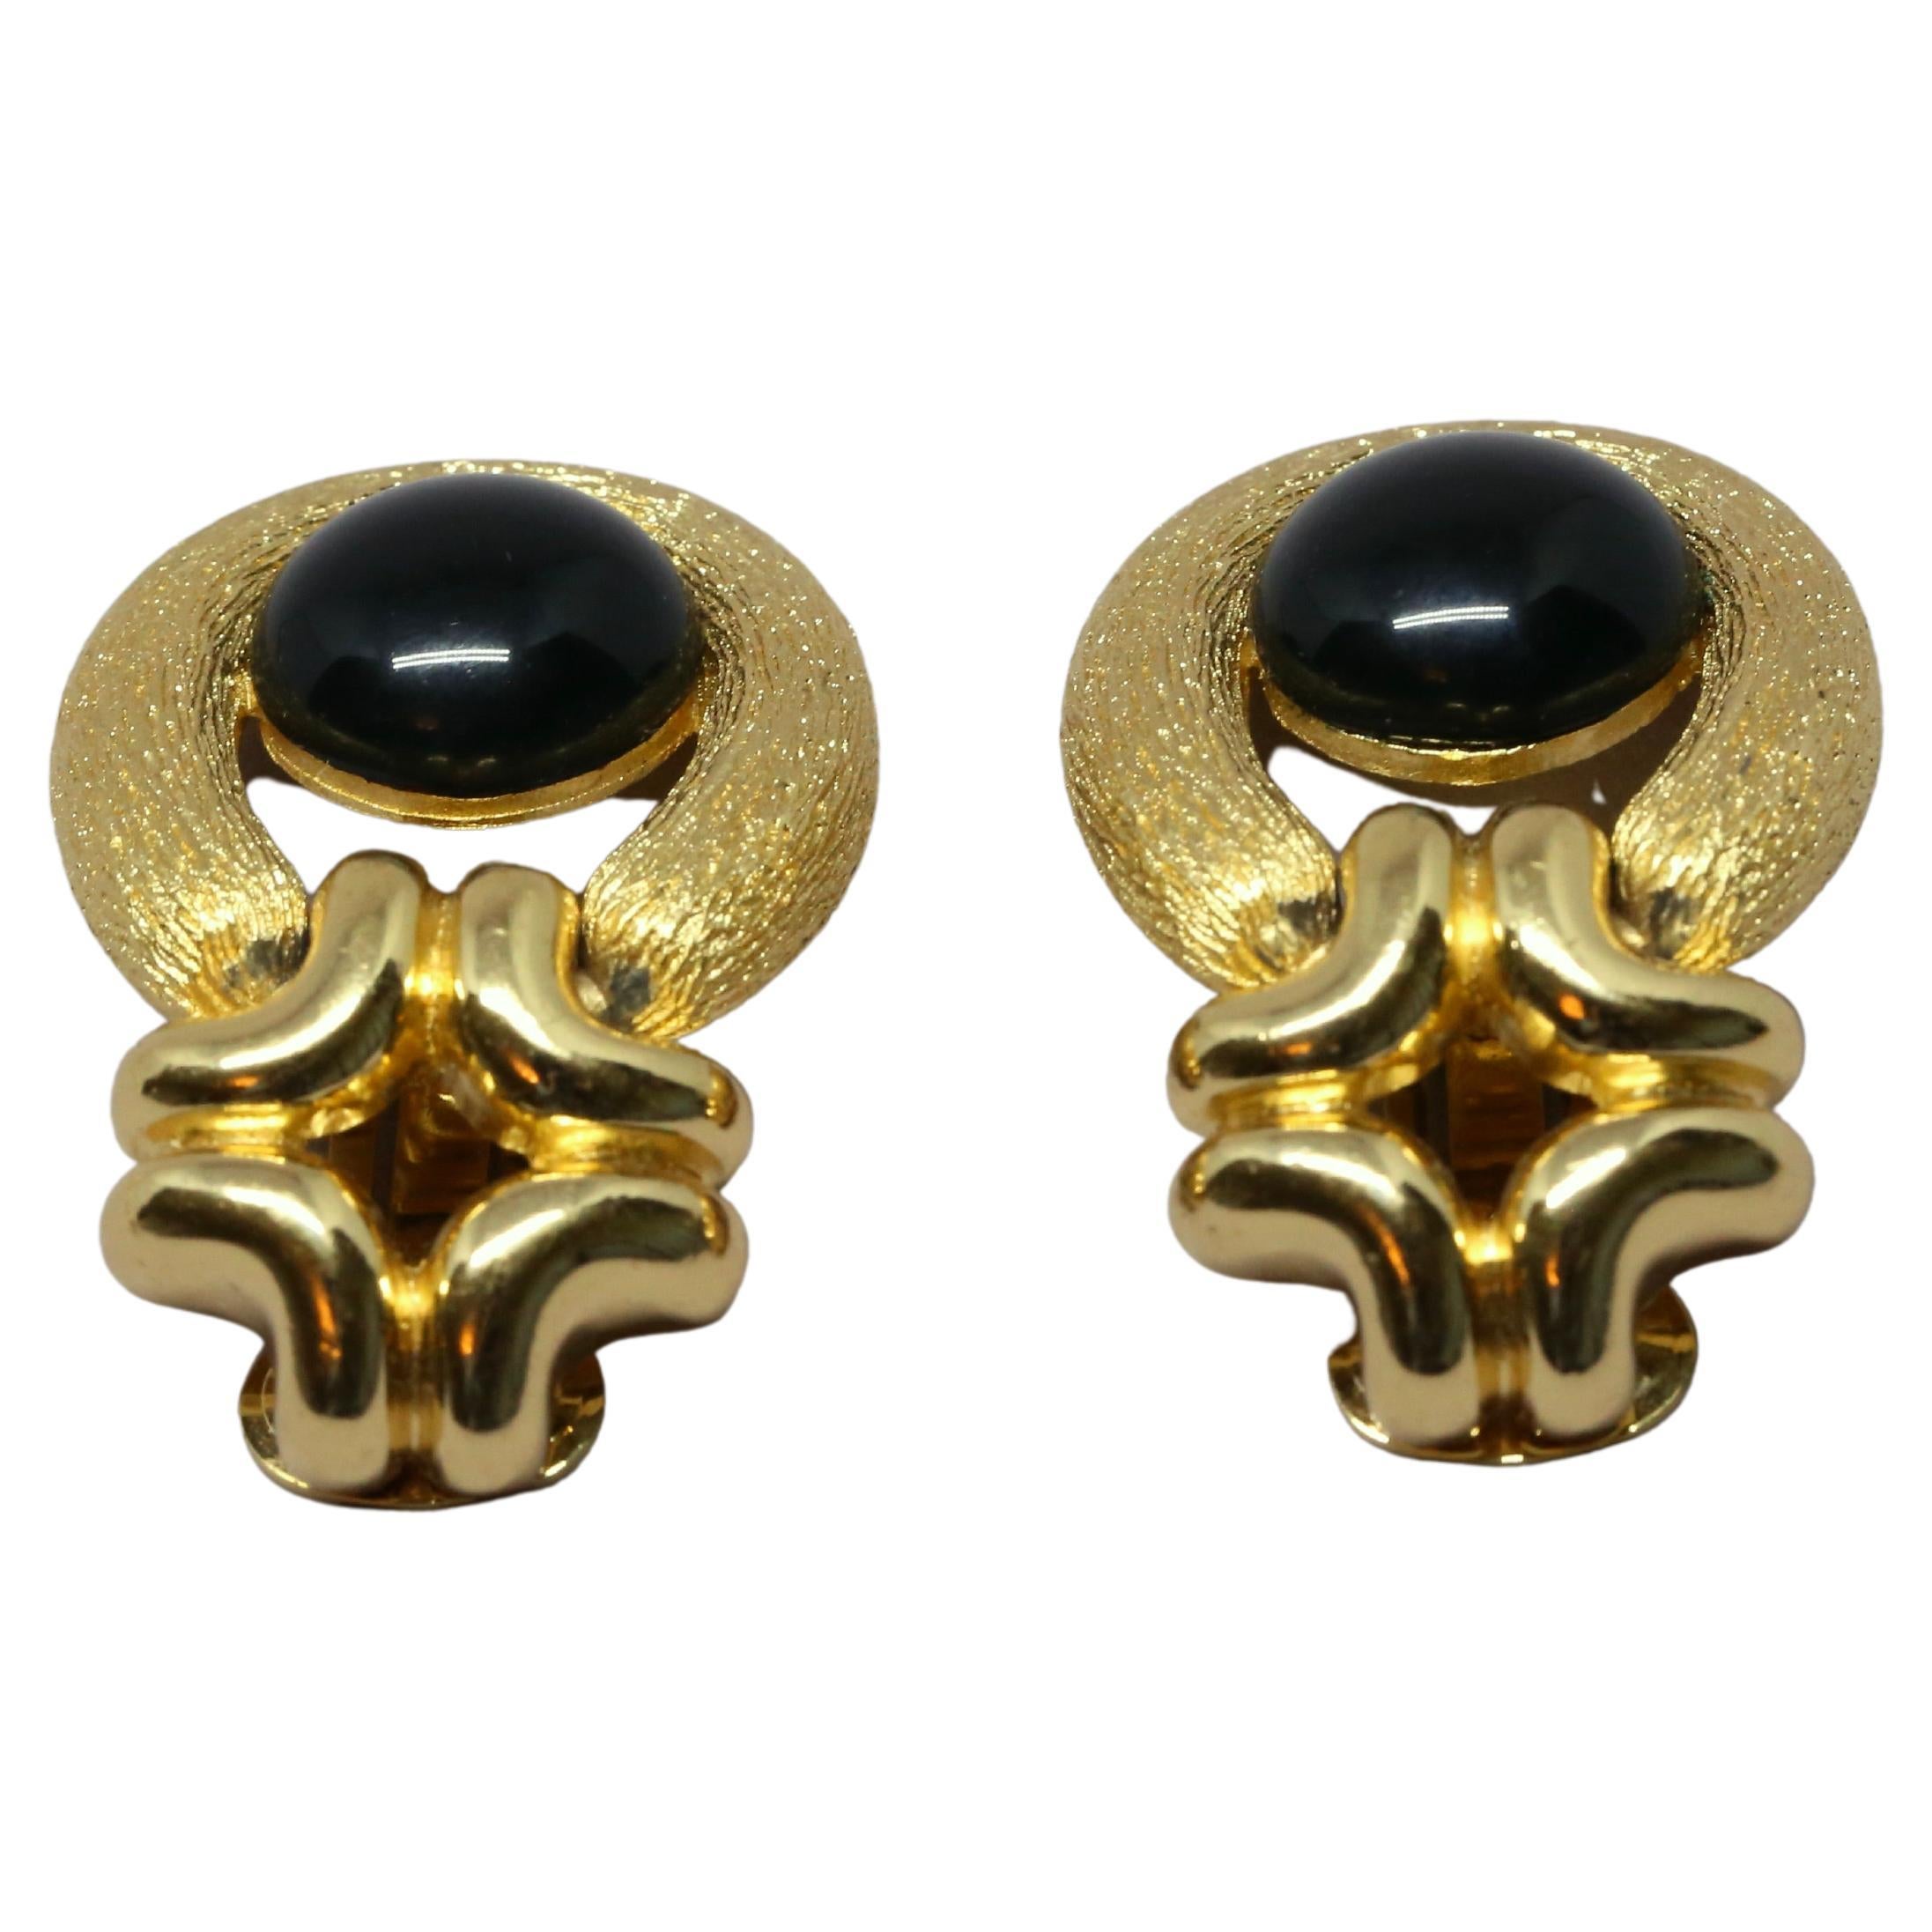 1980's CHRISTIAN DIOR textured gilt earrings with black cabochons In Good Condition For Sale In San Fransisco, CA